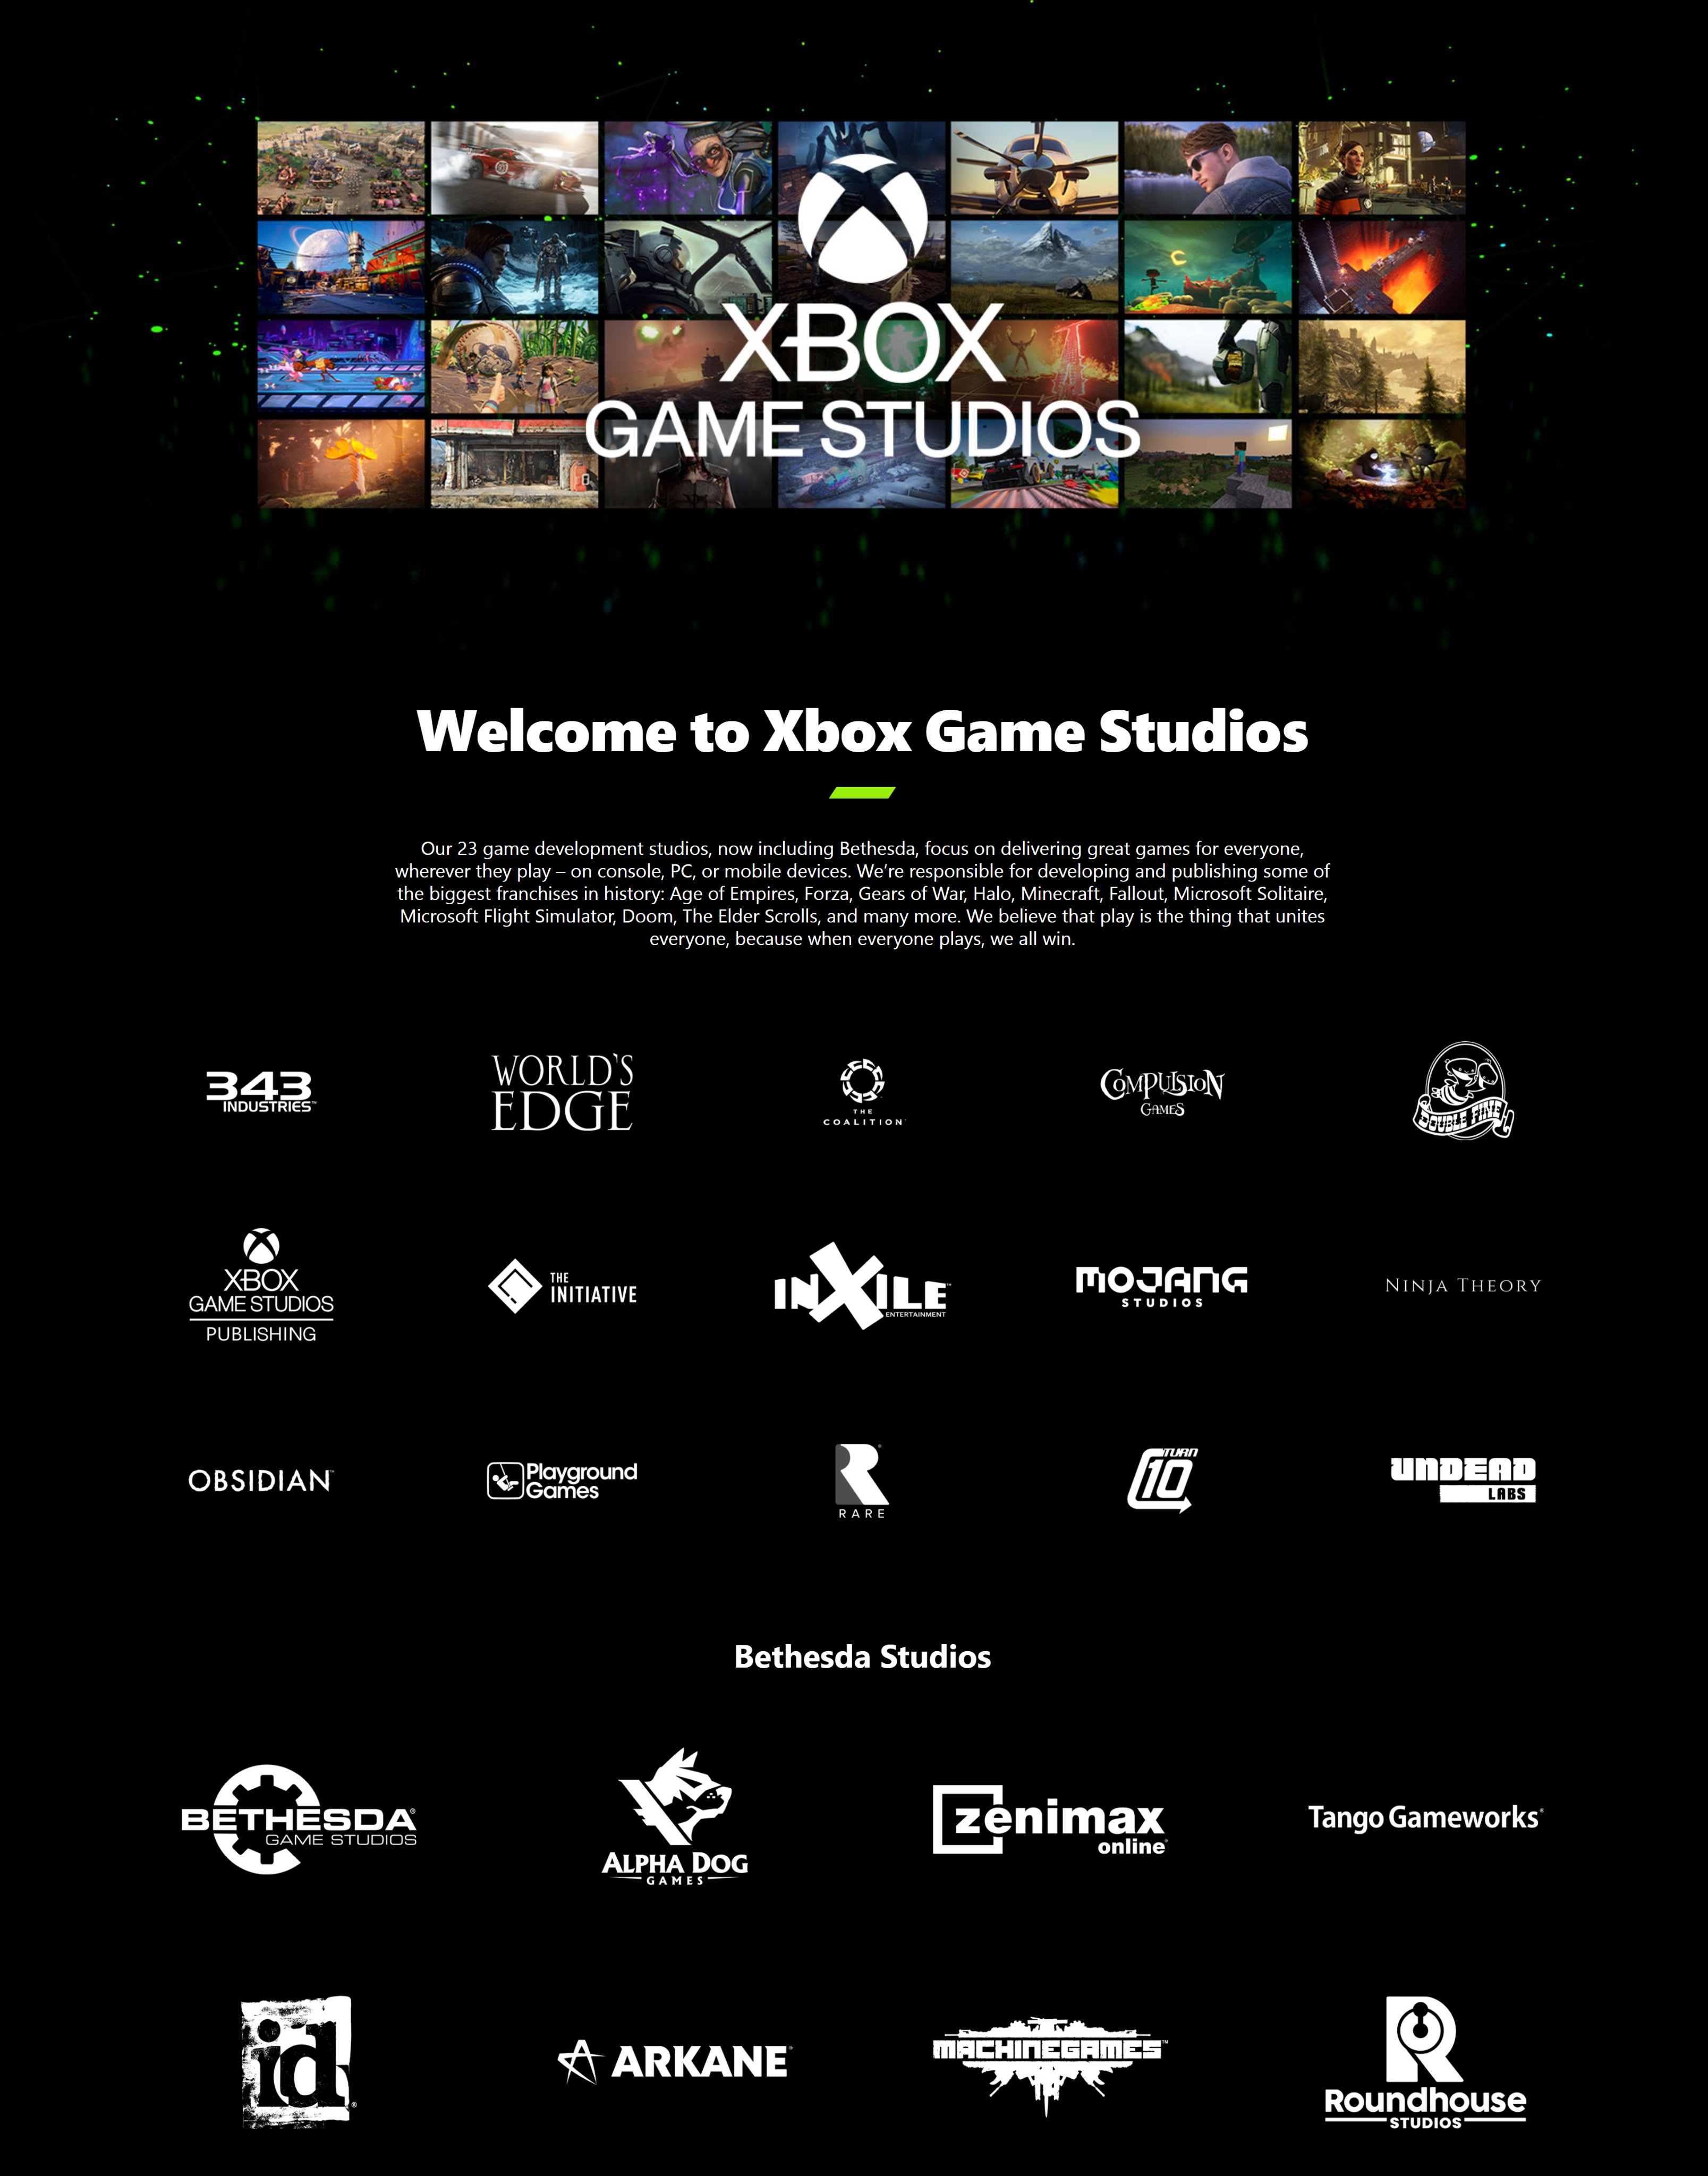 Klobrille on Twitter: "Xbox updated the official Xbox Game Studios/Xbox  first-party studios page to now include all of Bethesdas studios.  https://t.co/i7kJadO2iQ https://t.co/yUAvFpyIvL" / Twitter